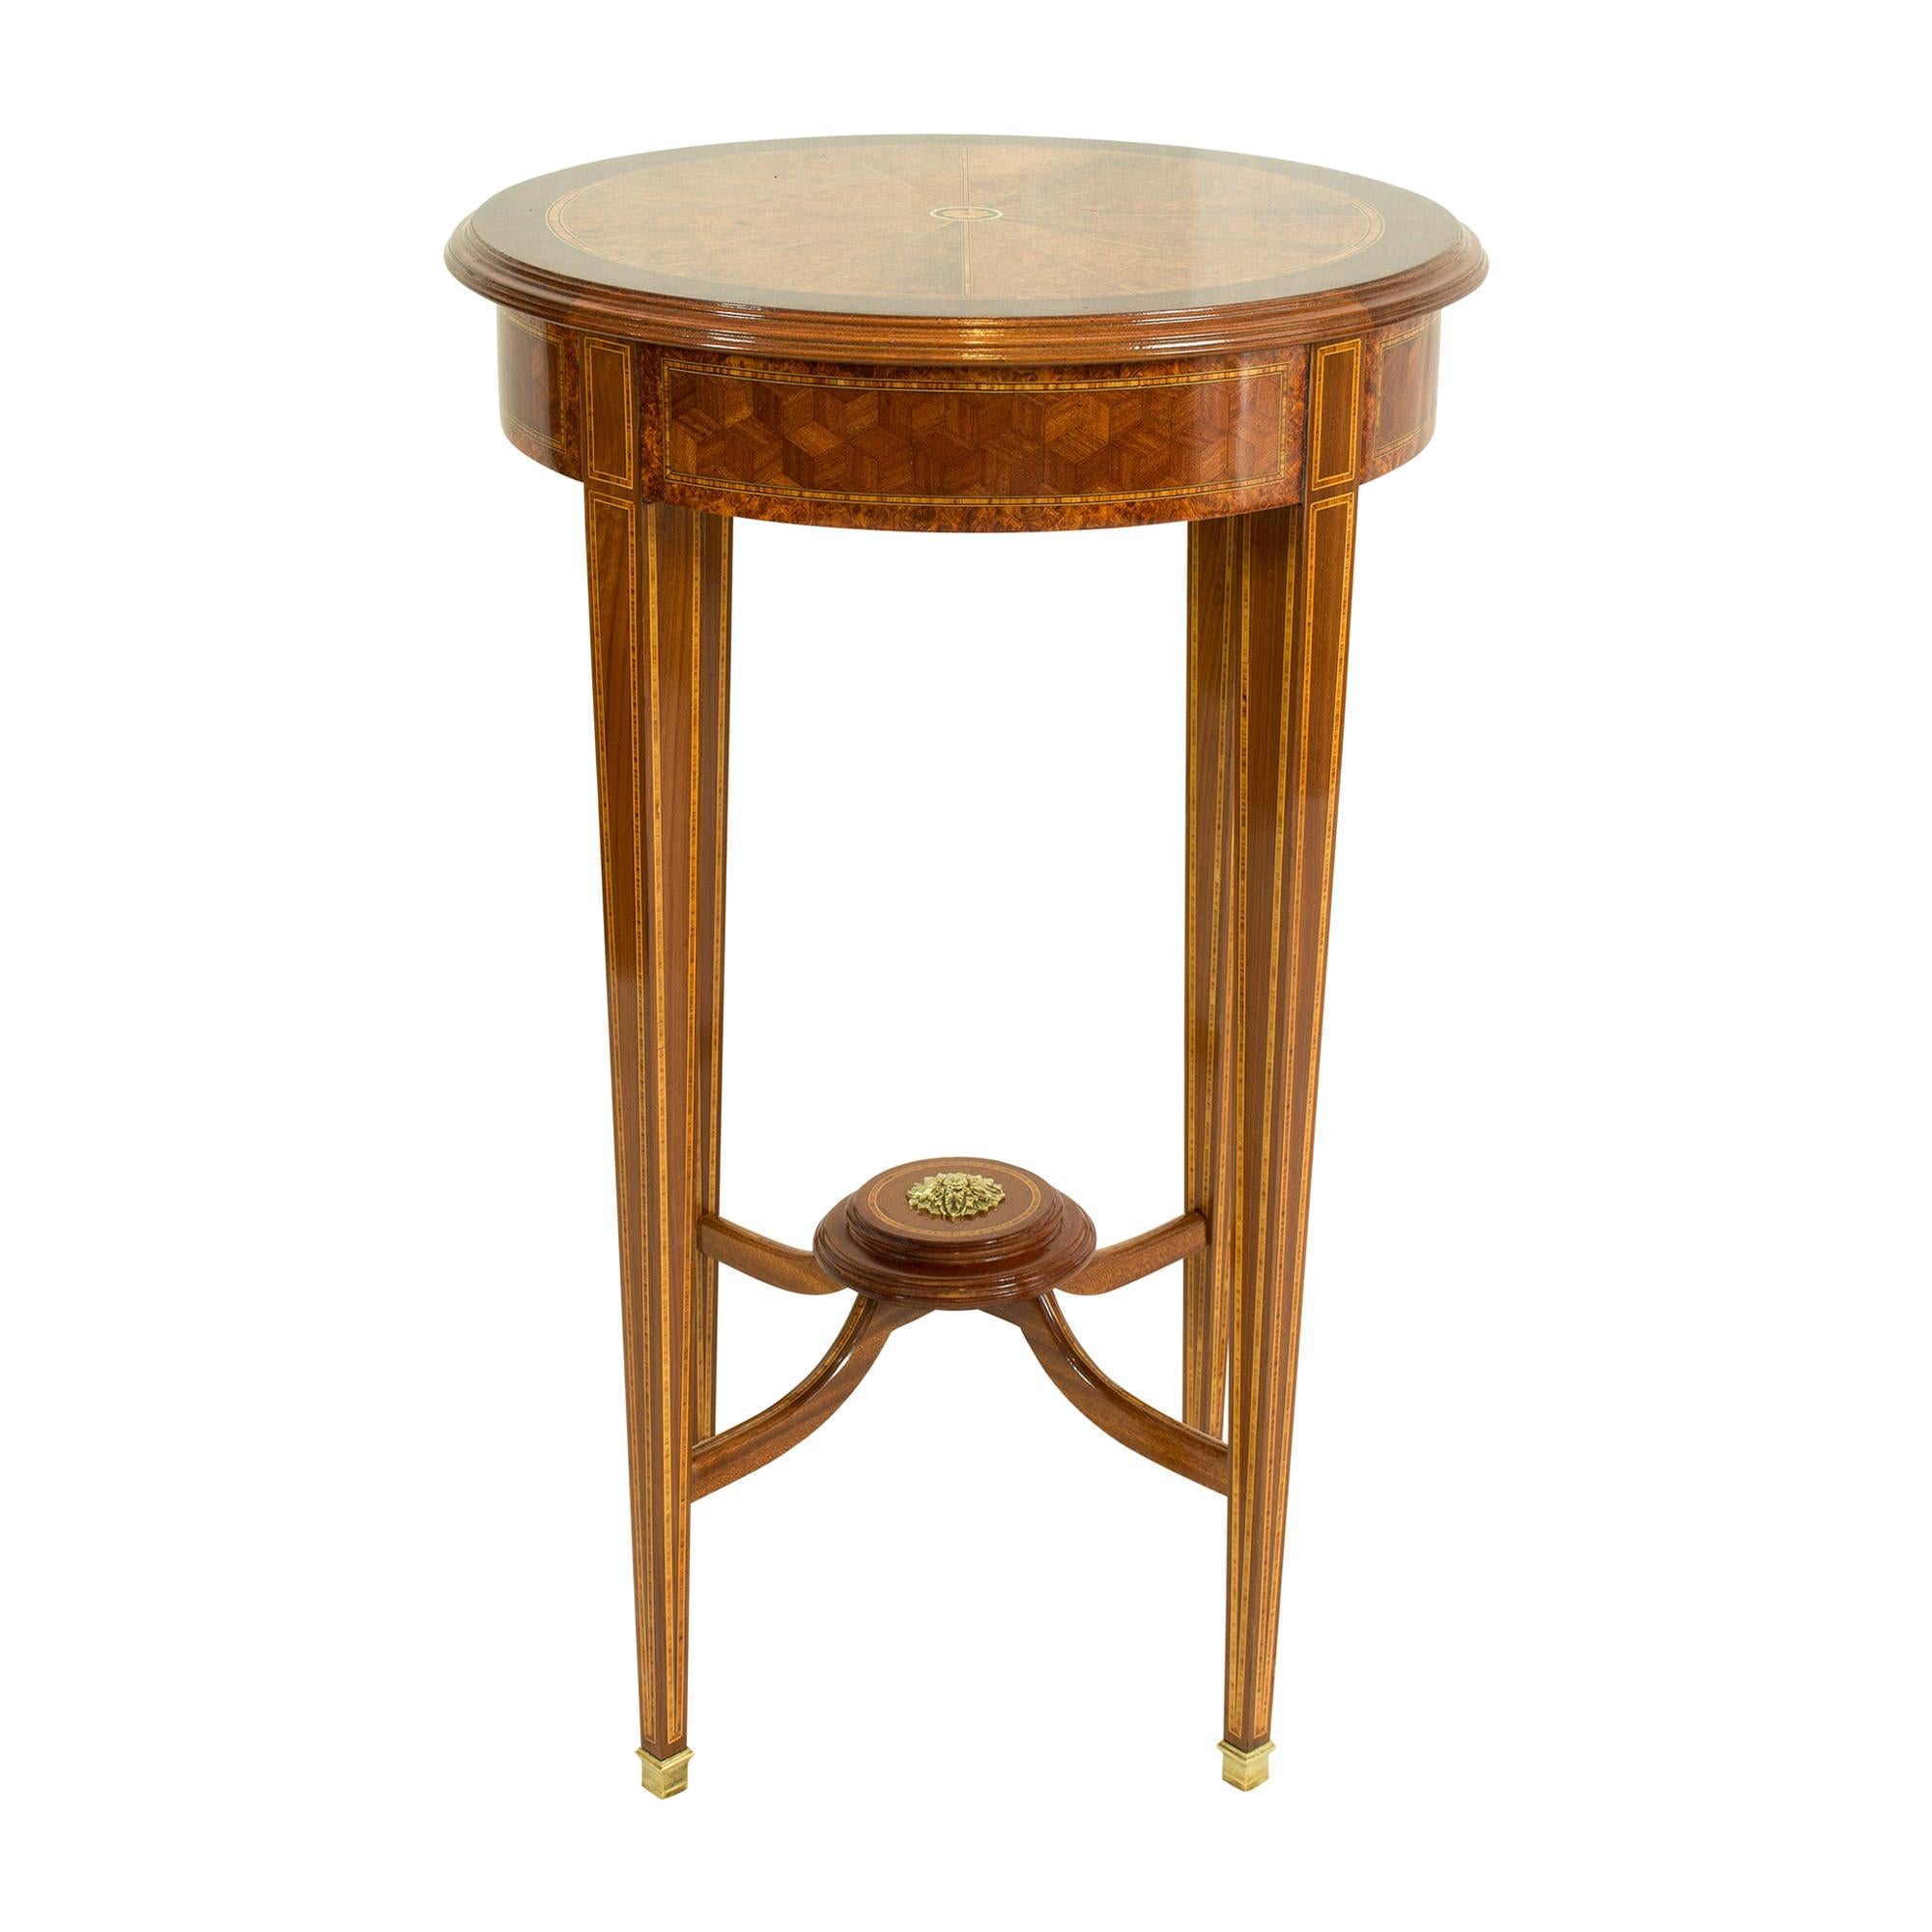 Edwardian Round Side Marquetry Table from England